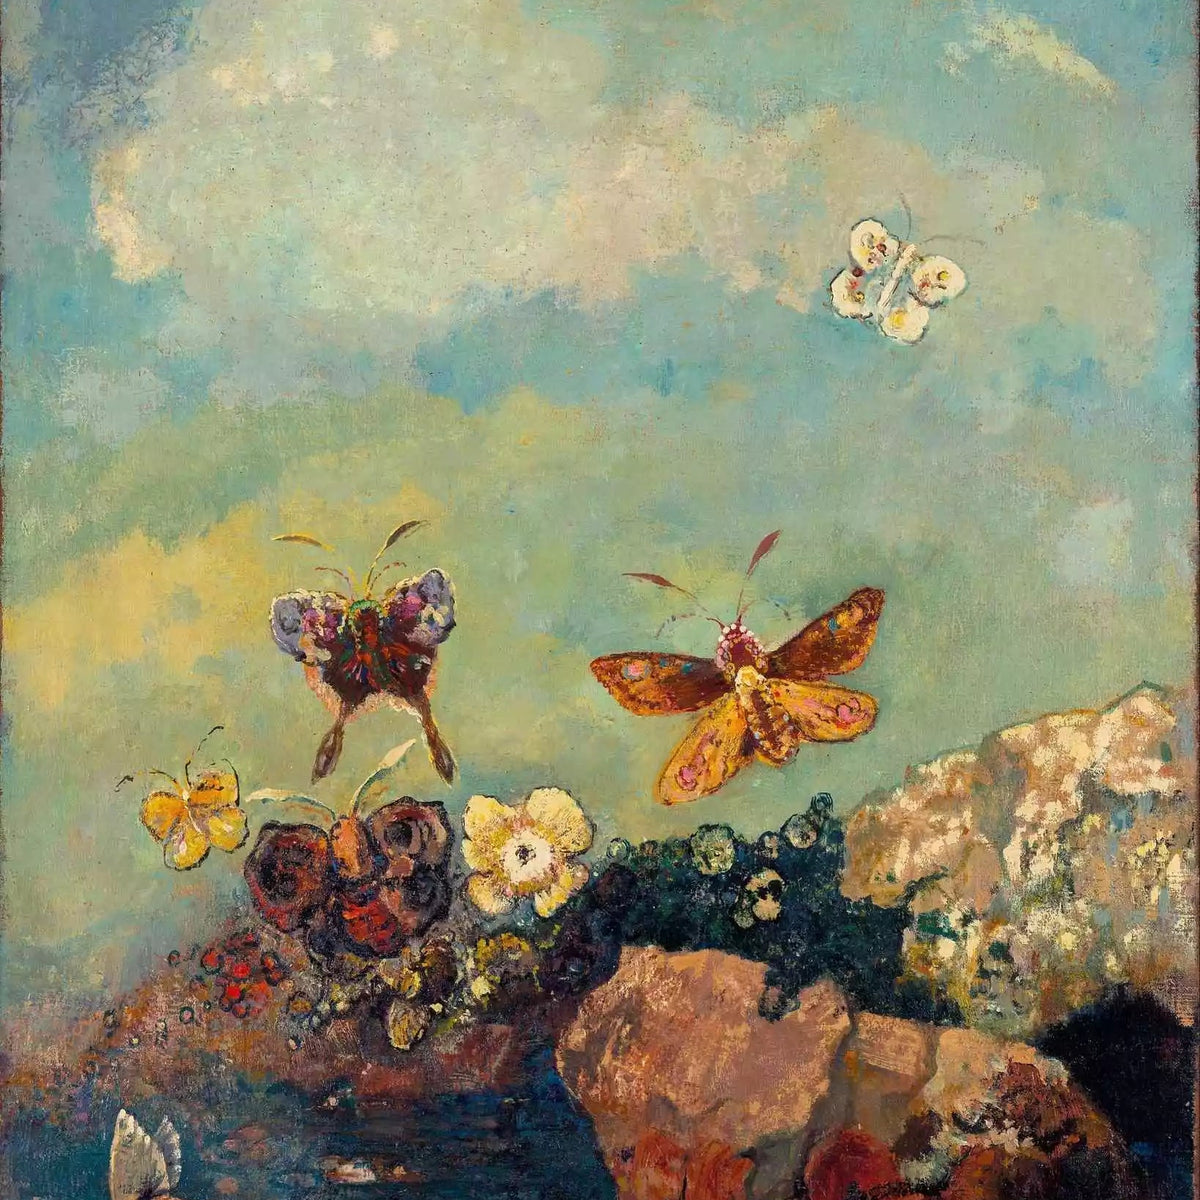 Butterflies - 16"x20" (40x50cm) - Canvas by Numbers US